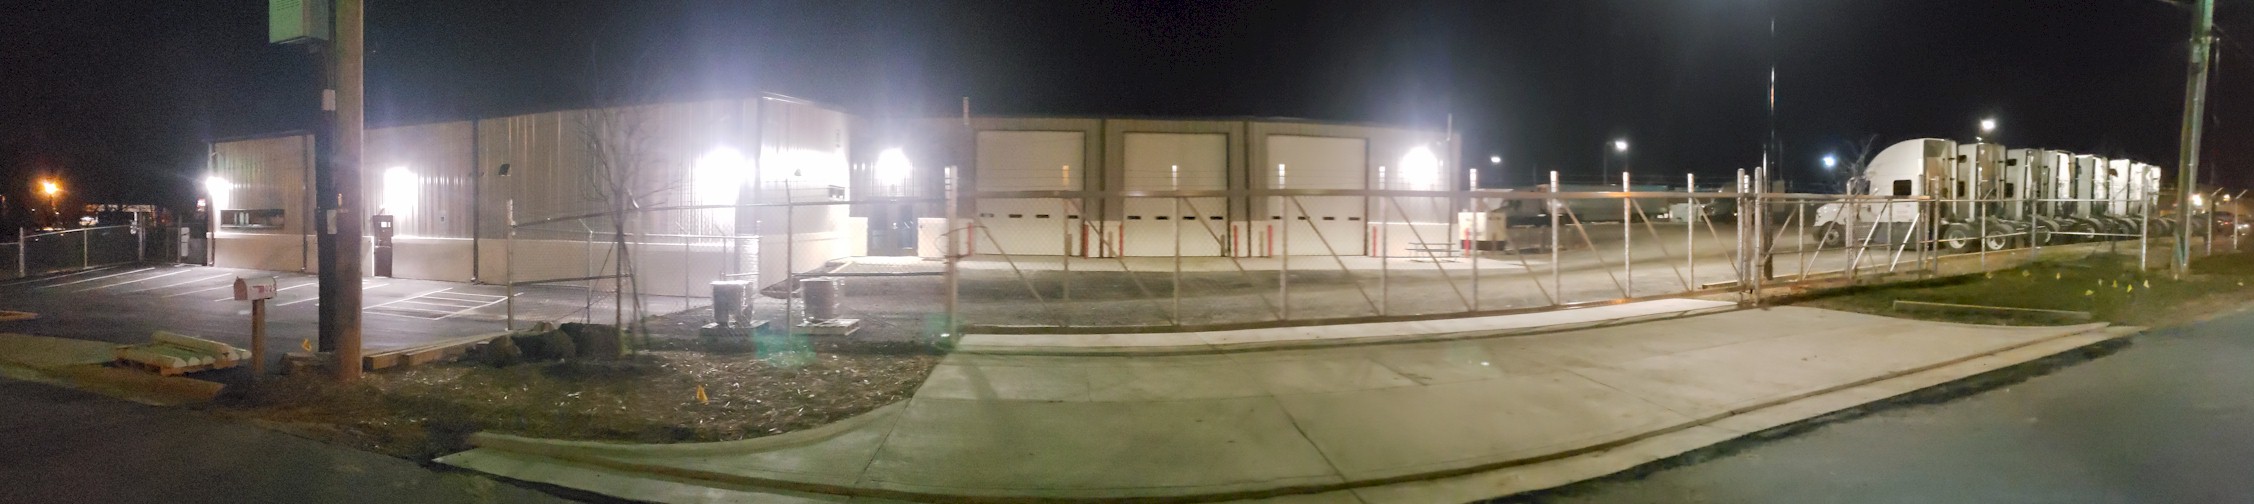 Barr-Nunn Charlotte, NC truck terminal building showing exterior view at night